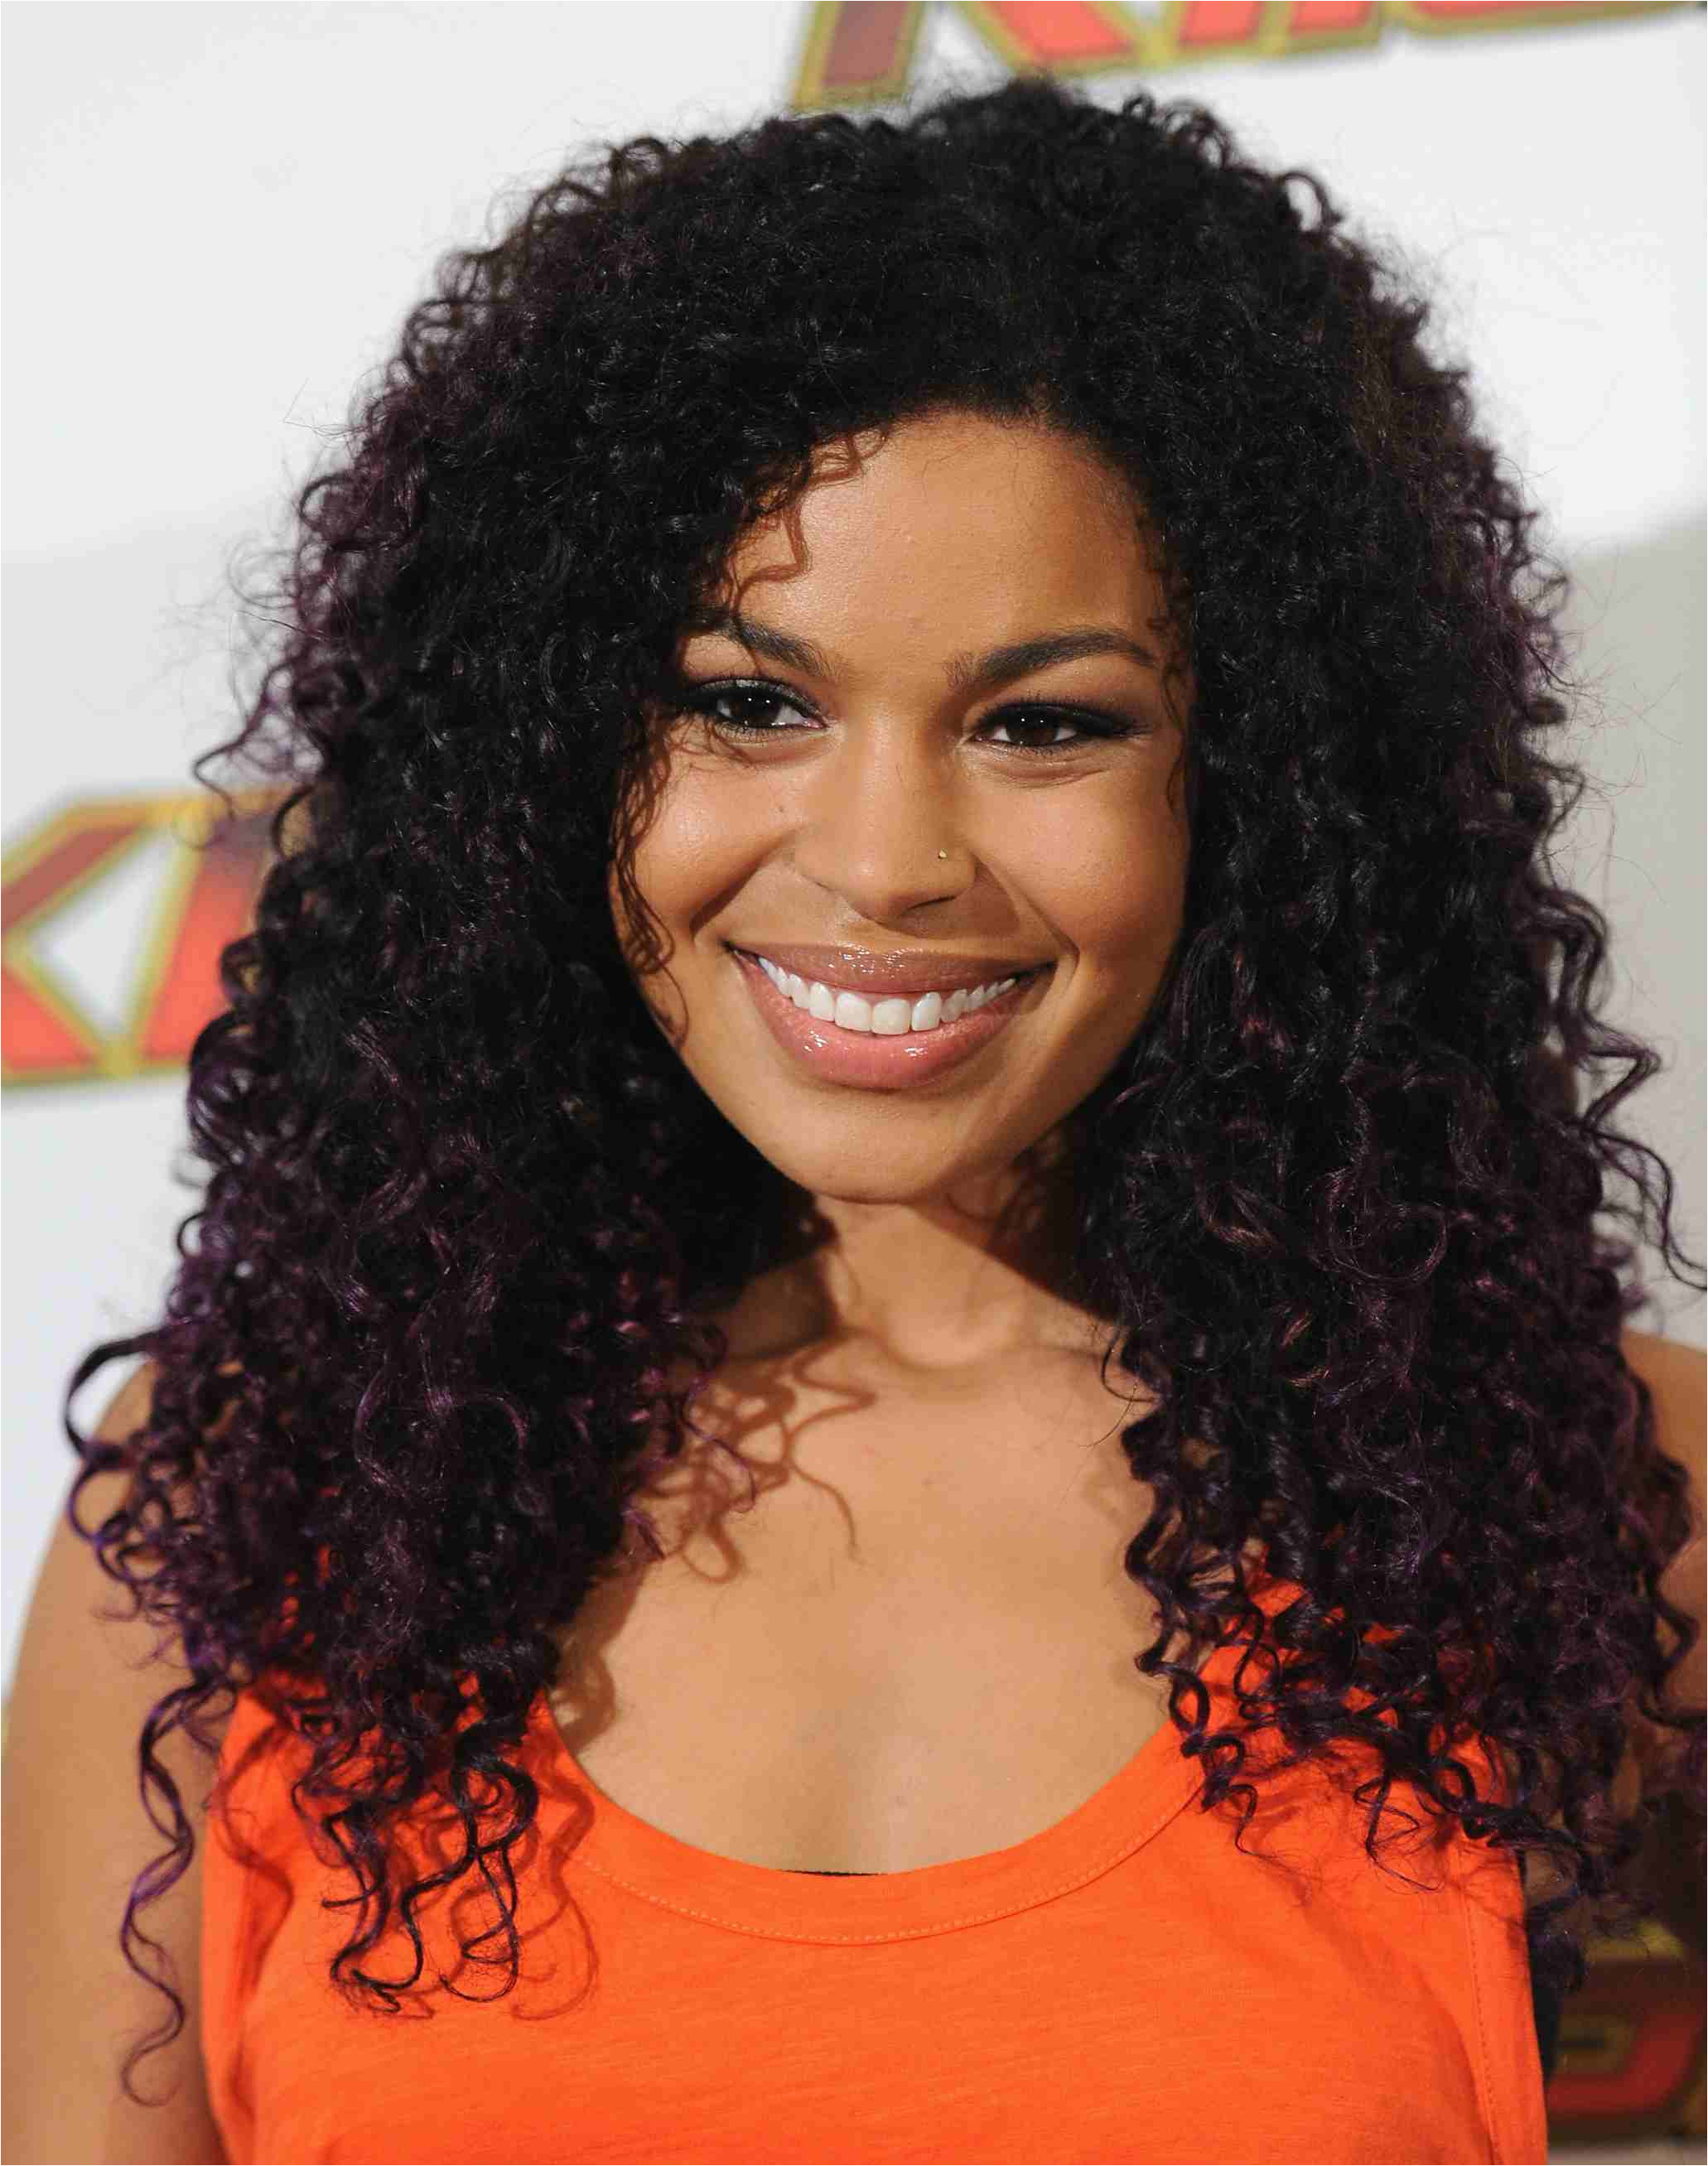 Black Hairstyles that Can Get Wet 22 Fun and Y Hairstyles for Naturally Curly Hair